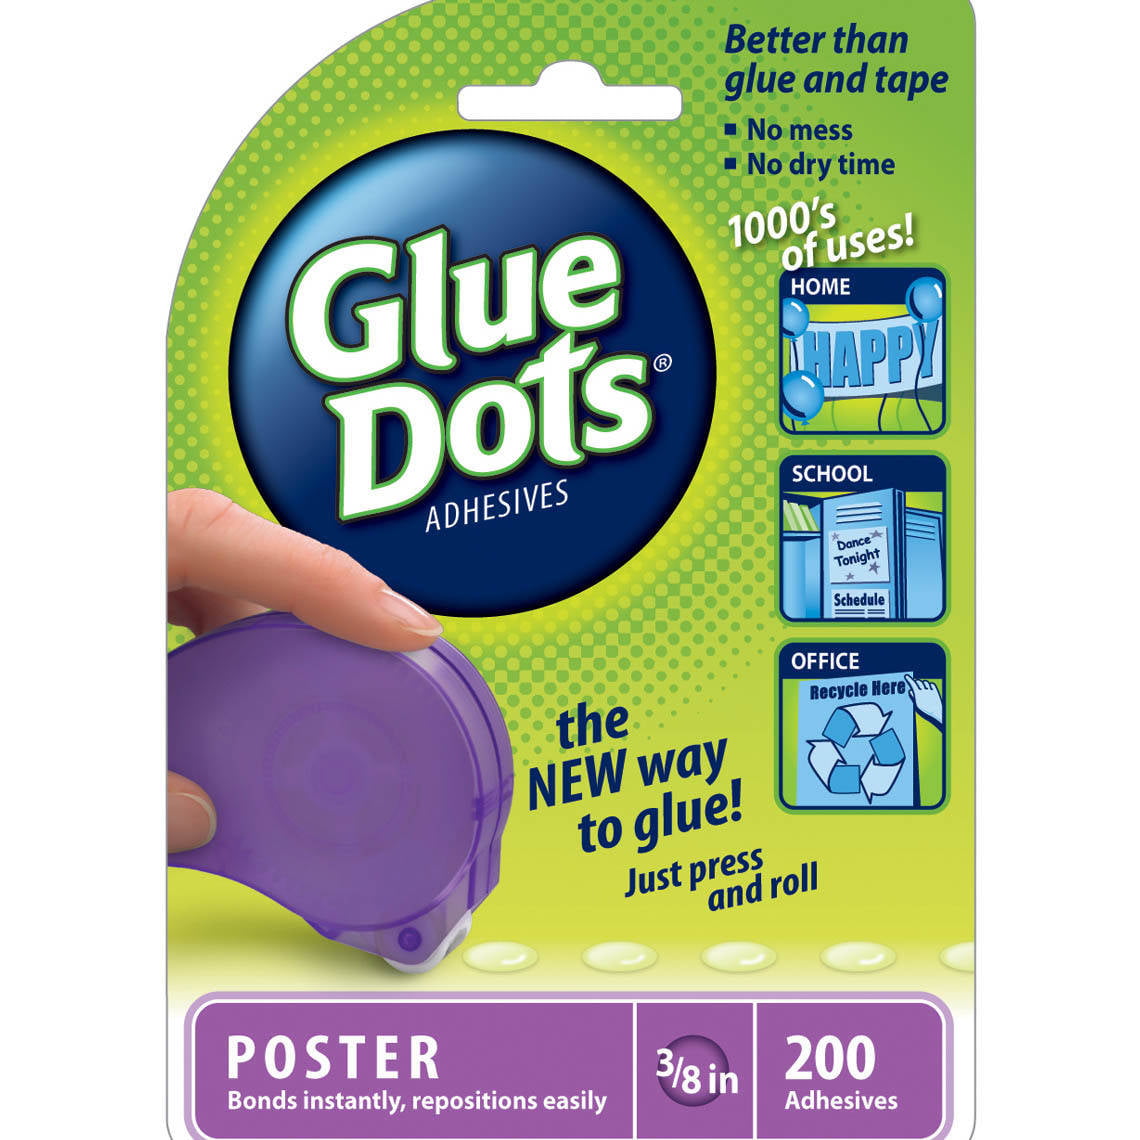 7 Things You Probably Didn't Know About Glue Dots